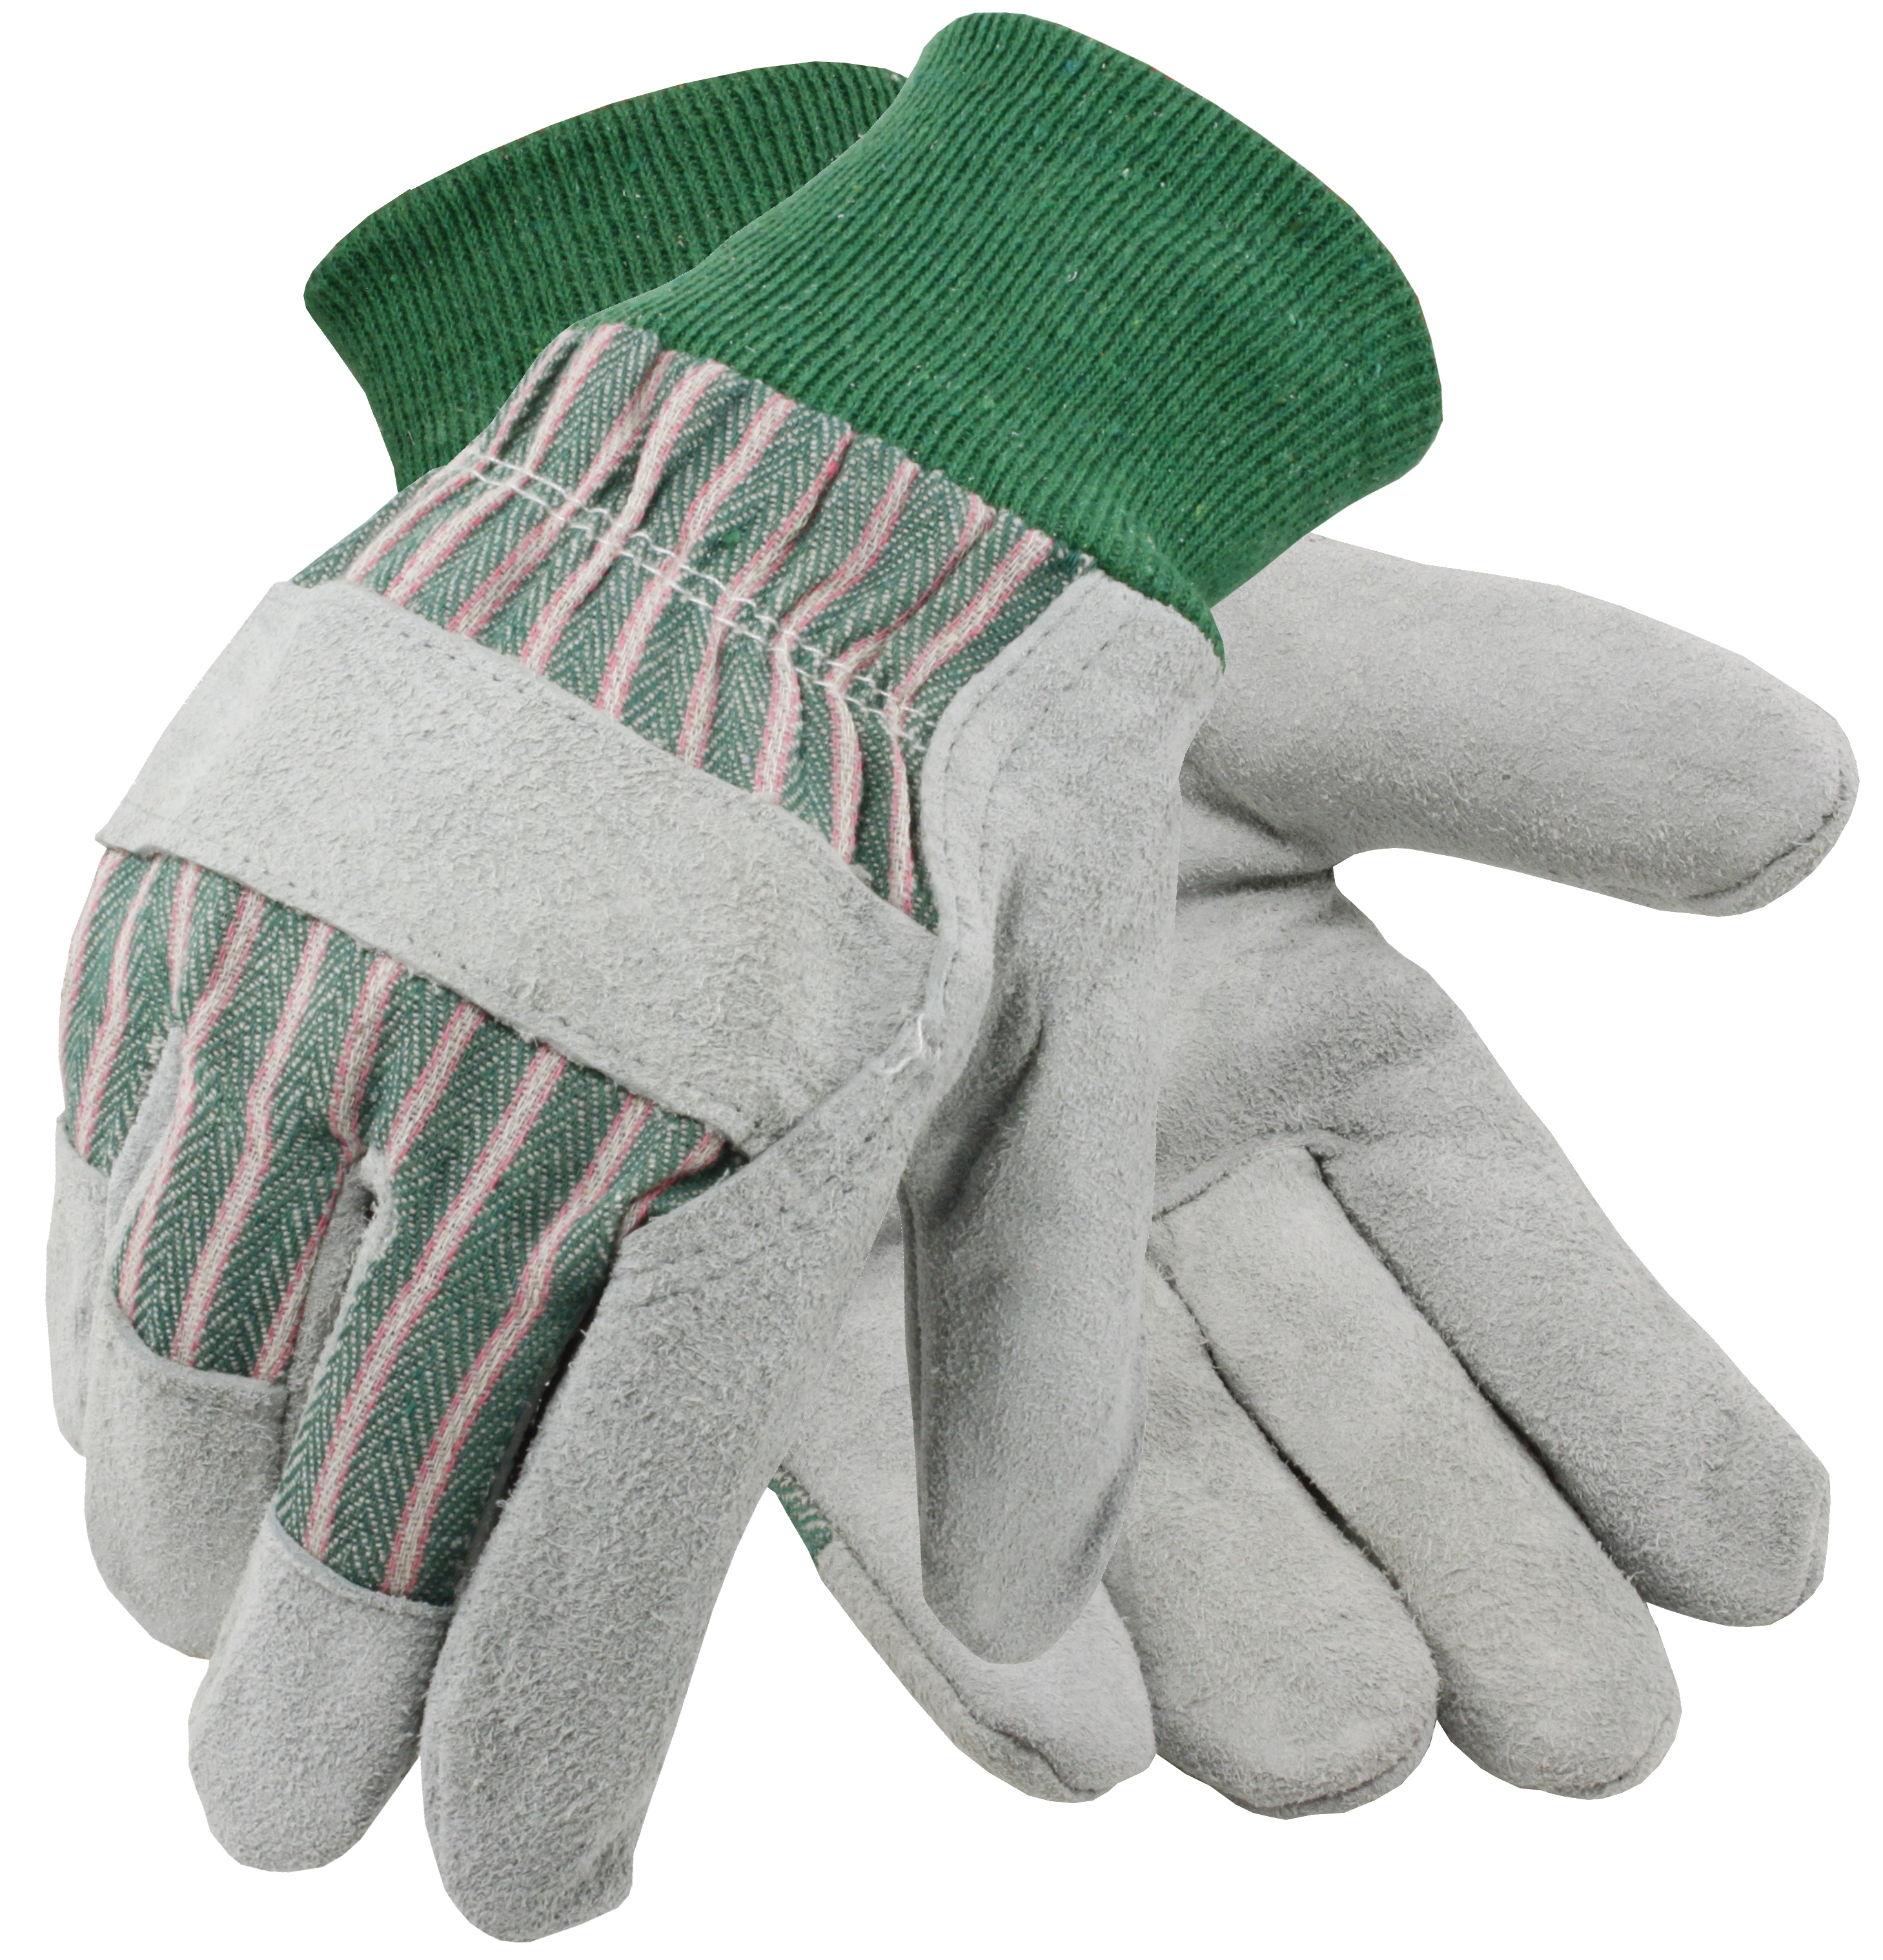 Leather Palm Gloves, Knit Wrist, 1 Pair